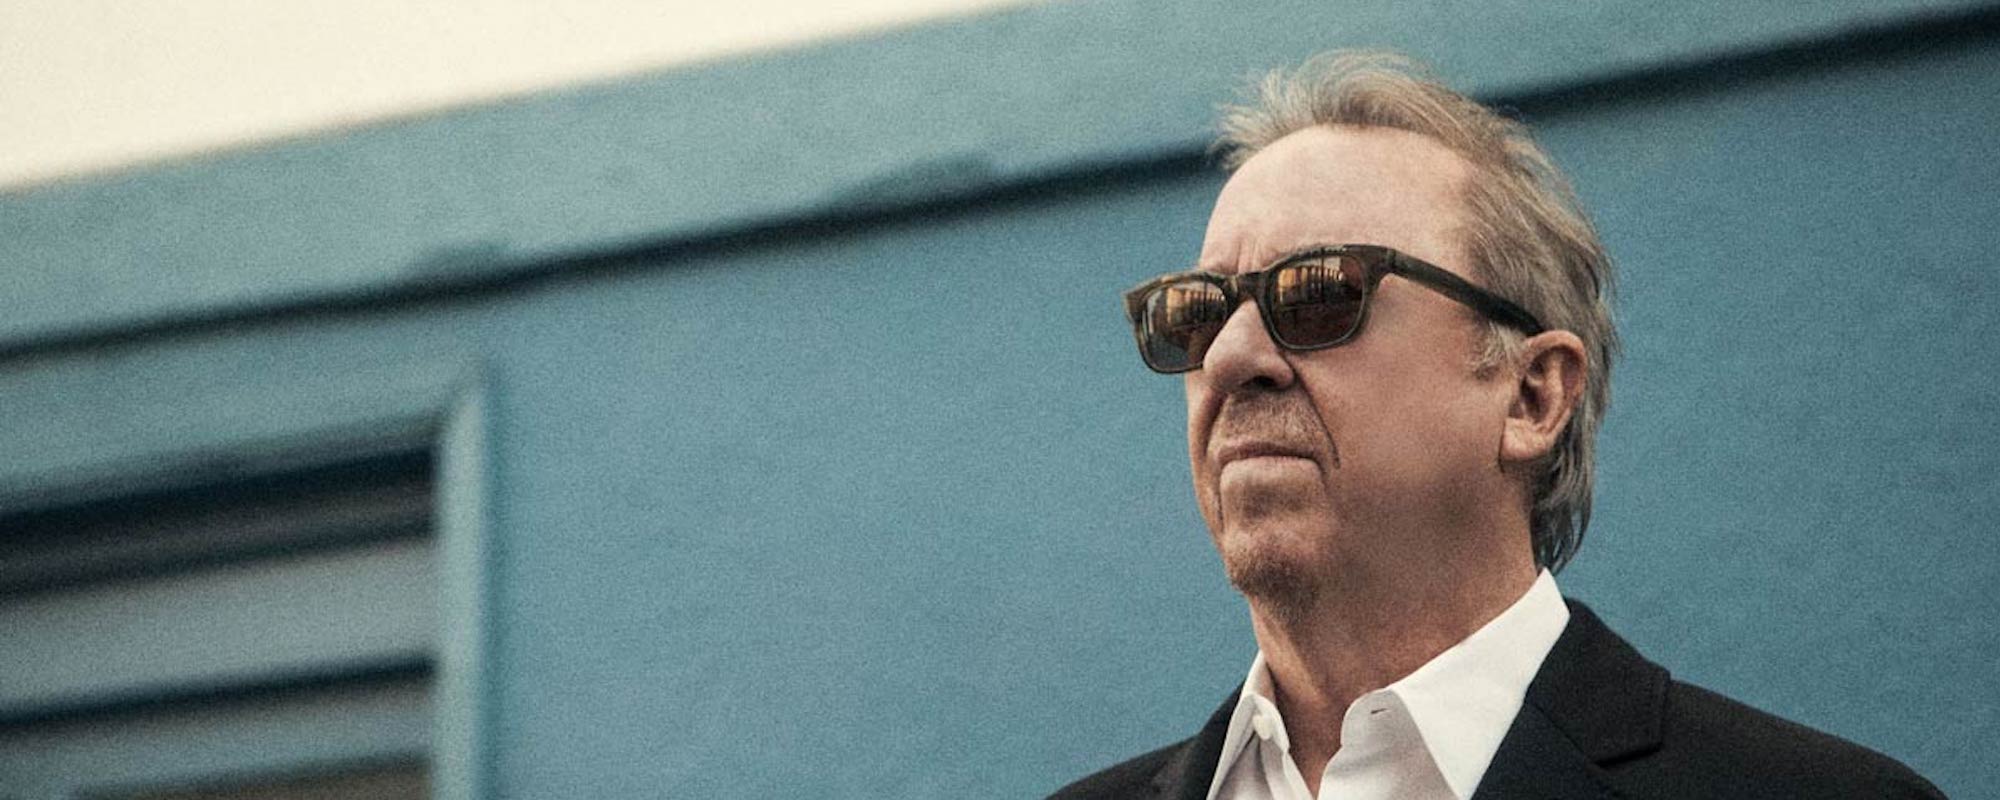 10 Boz Scaggs Songs Spanning the Late ’60s Through 2010s